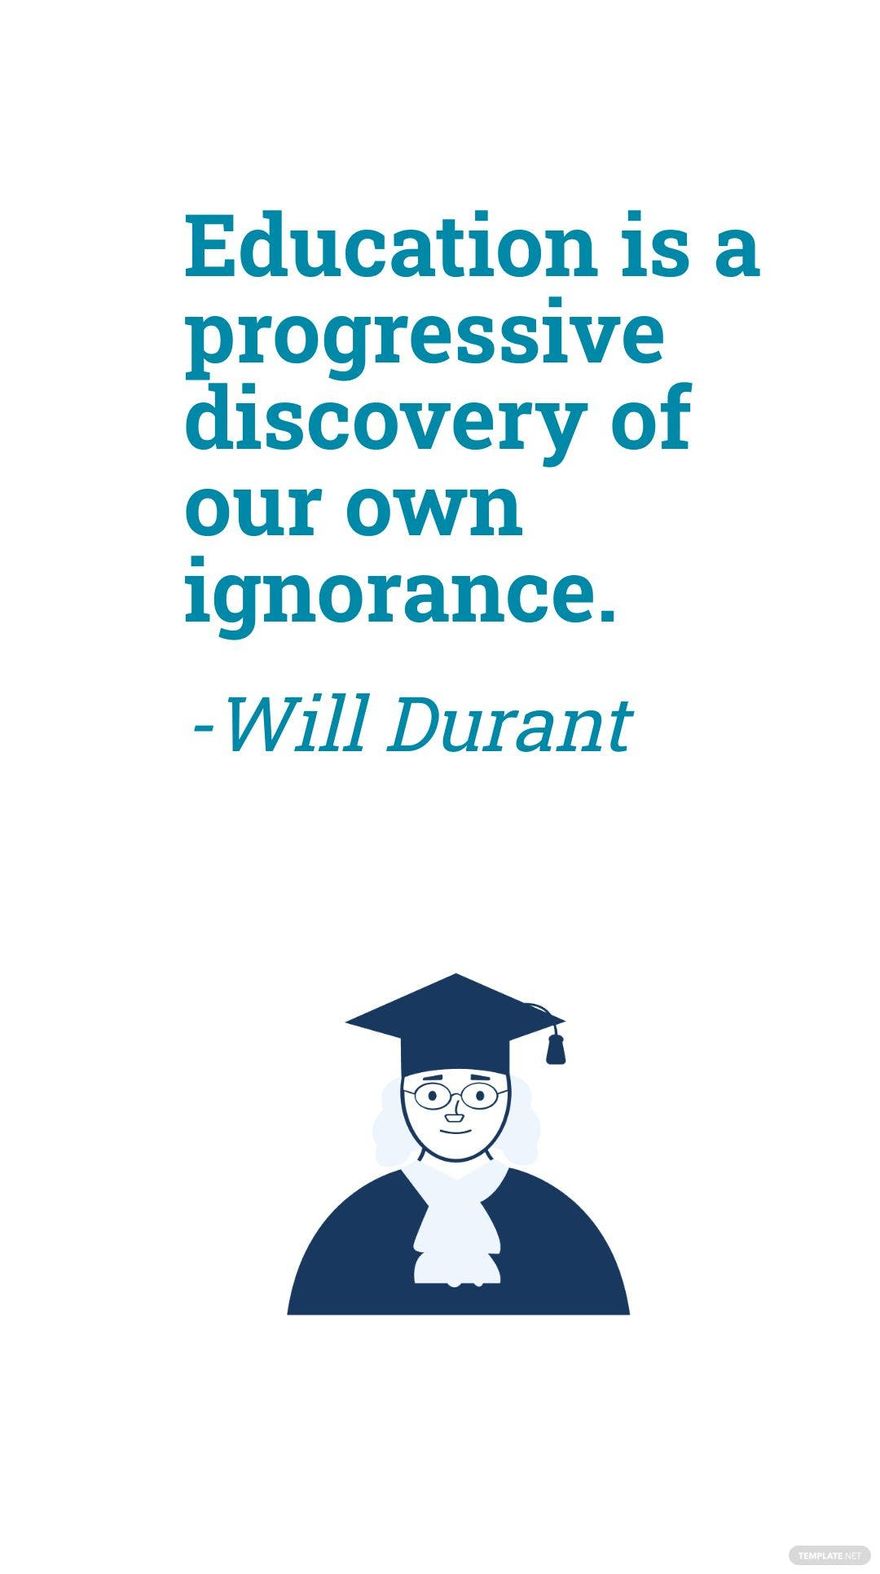 Will Durant - Education is a progressive discovery of our own ignorance.